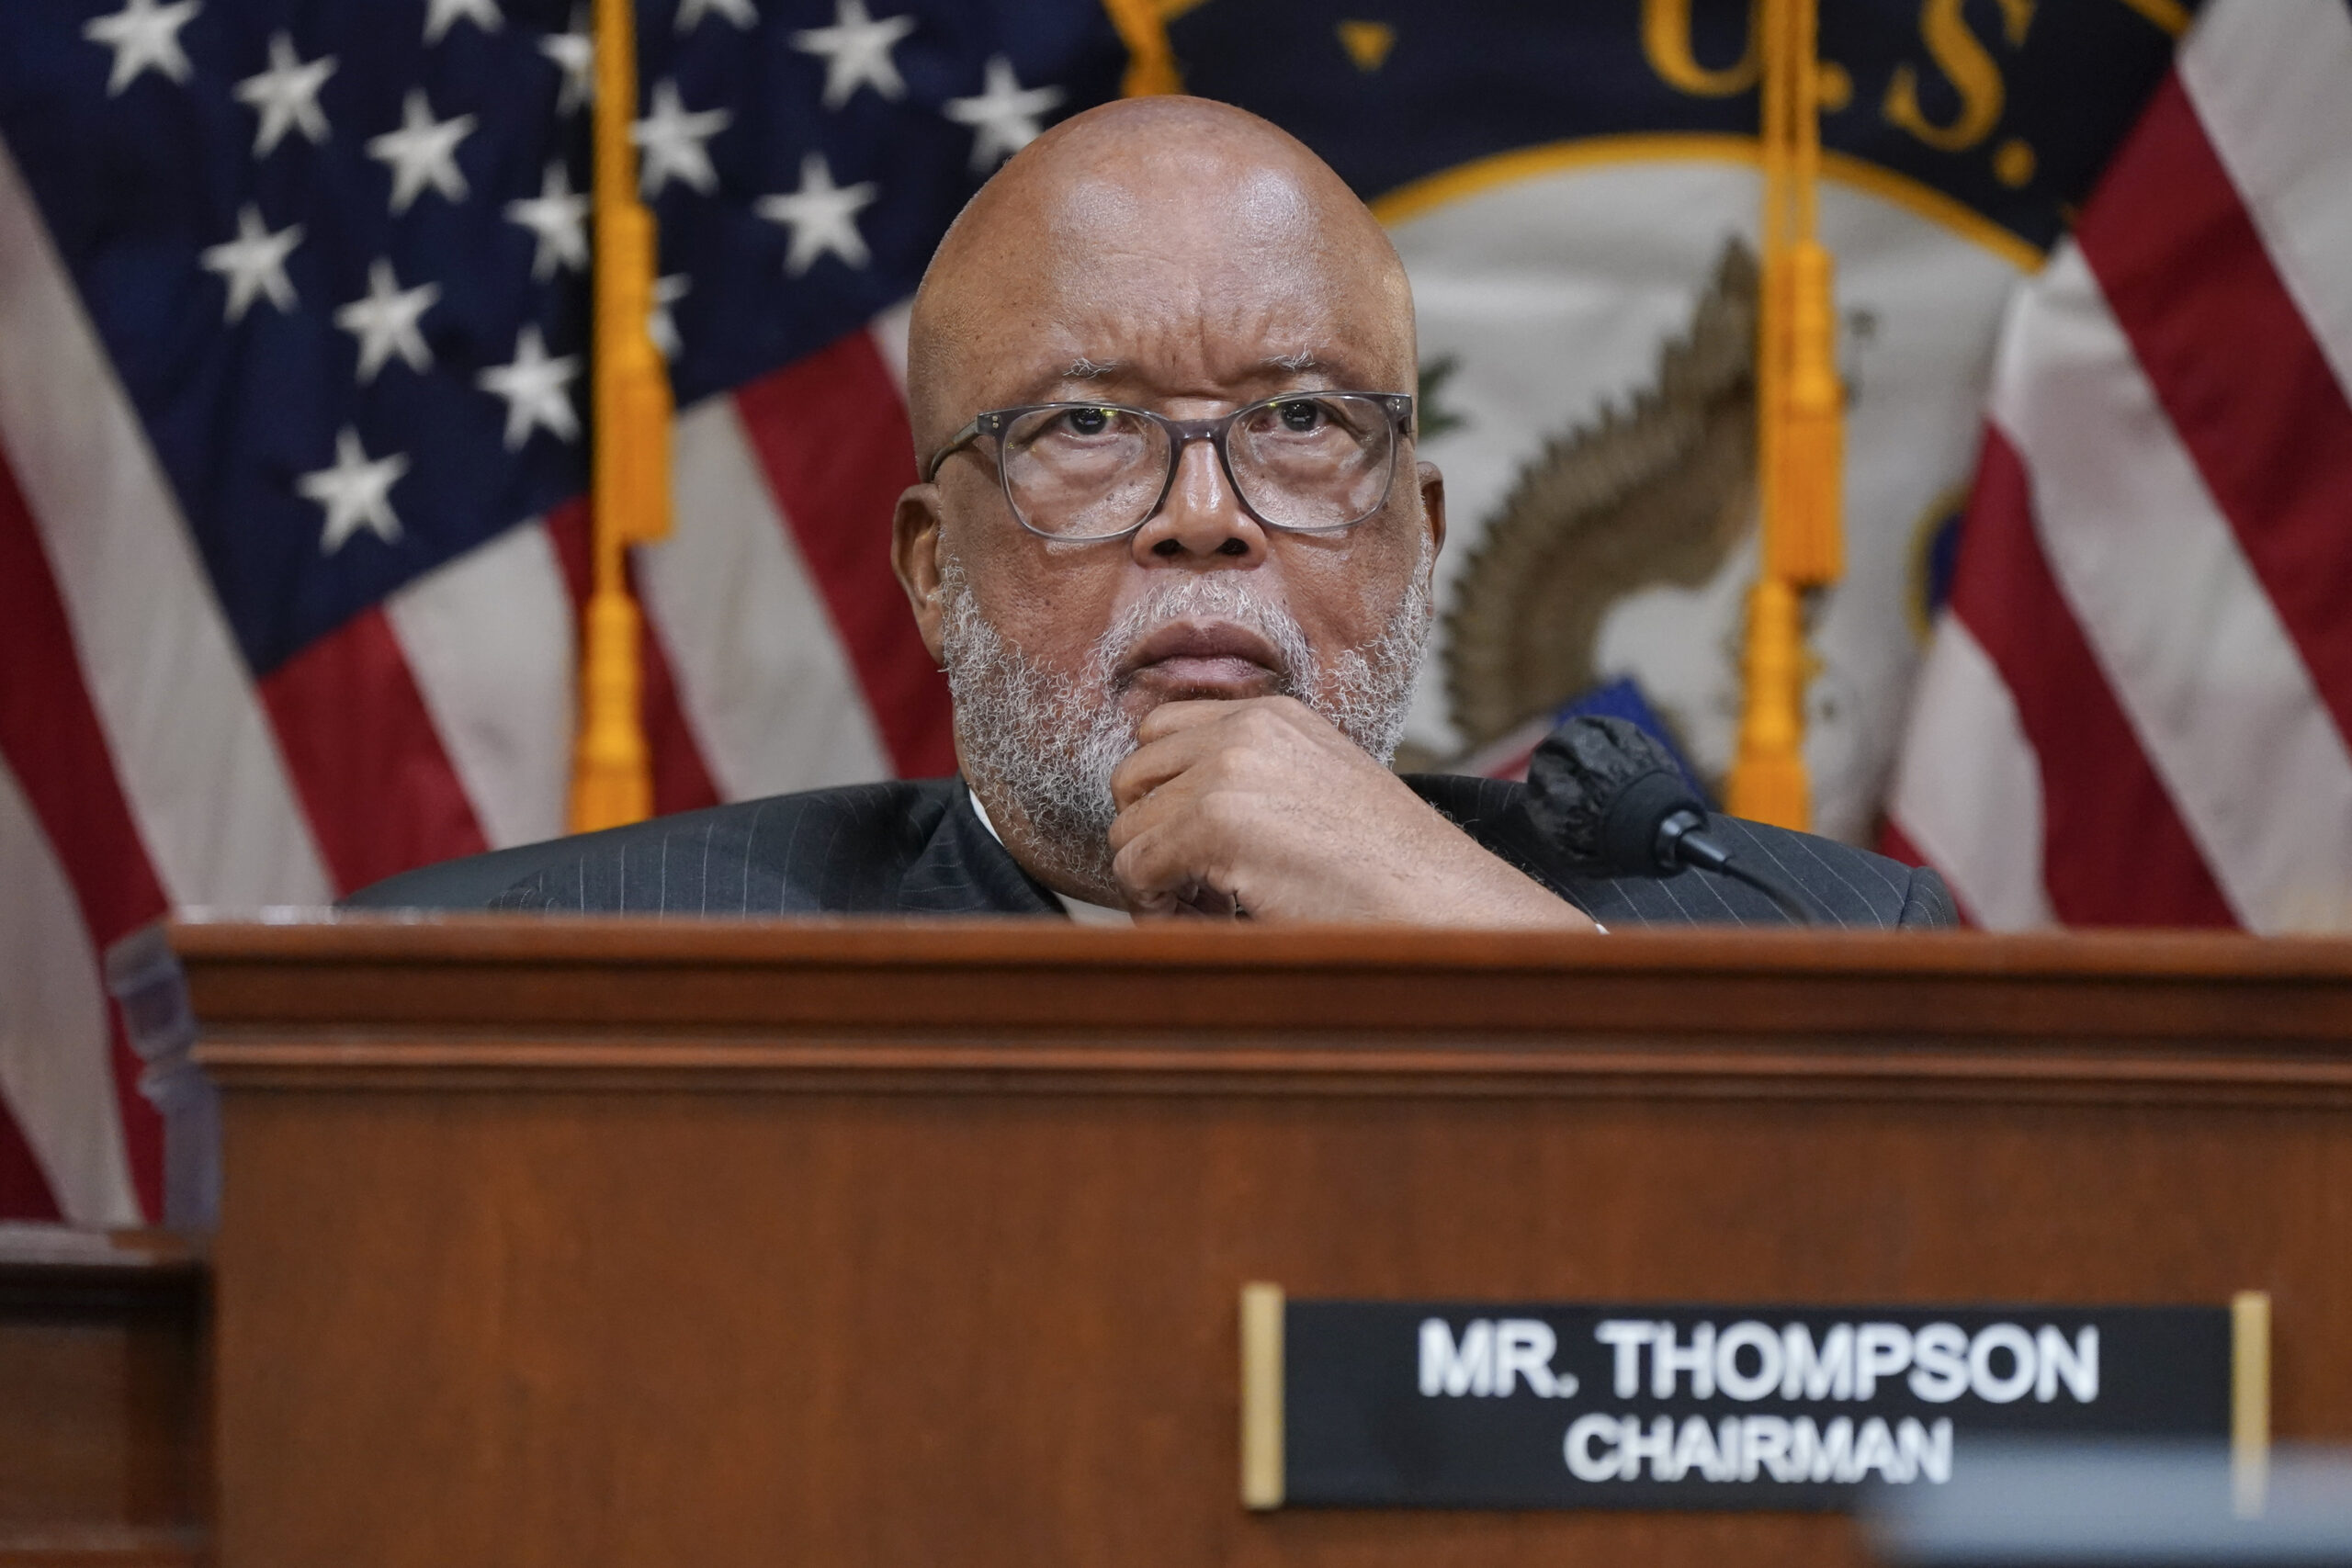 FILE - Chairman Bennie Thompson, D-Miss., listens as the House select committee investigating the Jan. 6 attack on the U.S. Capitol holds a hearing at the Capitol in Washington, July 12, 2022. The chairman of the House Jan. 6 committee has tested positive for COVID-19, but the panel will still hold its prime-time hearing on Thursday. Thompson announced Tuesday he tested positive for the virus. (AP Photo/J. Scott Applewhite, File)